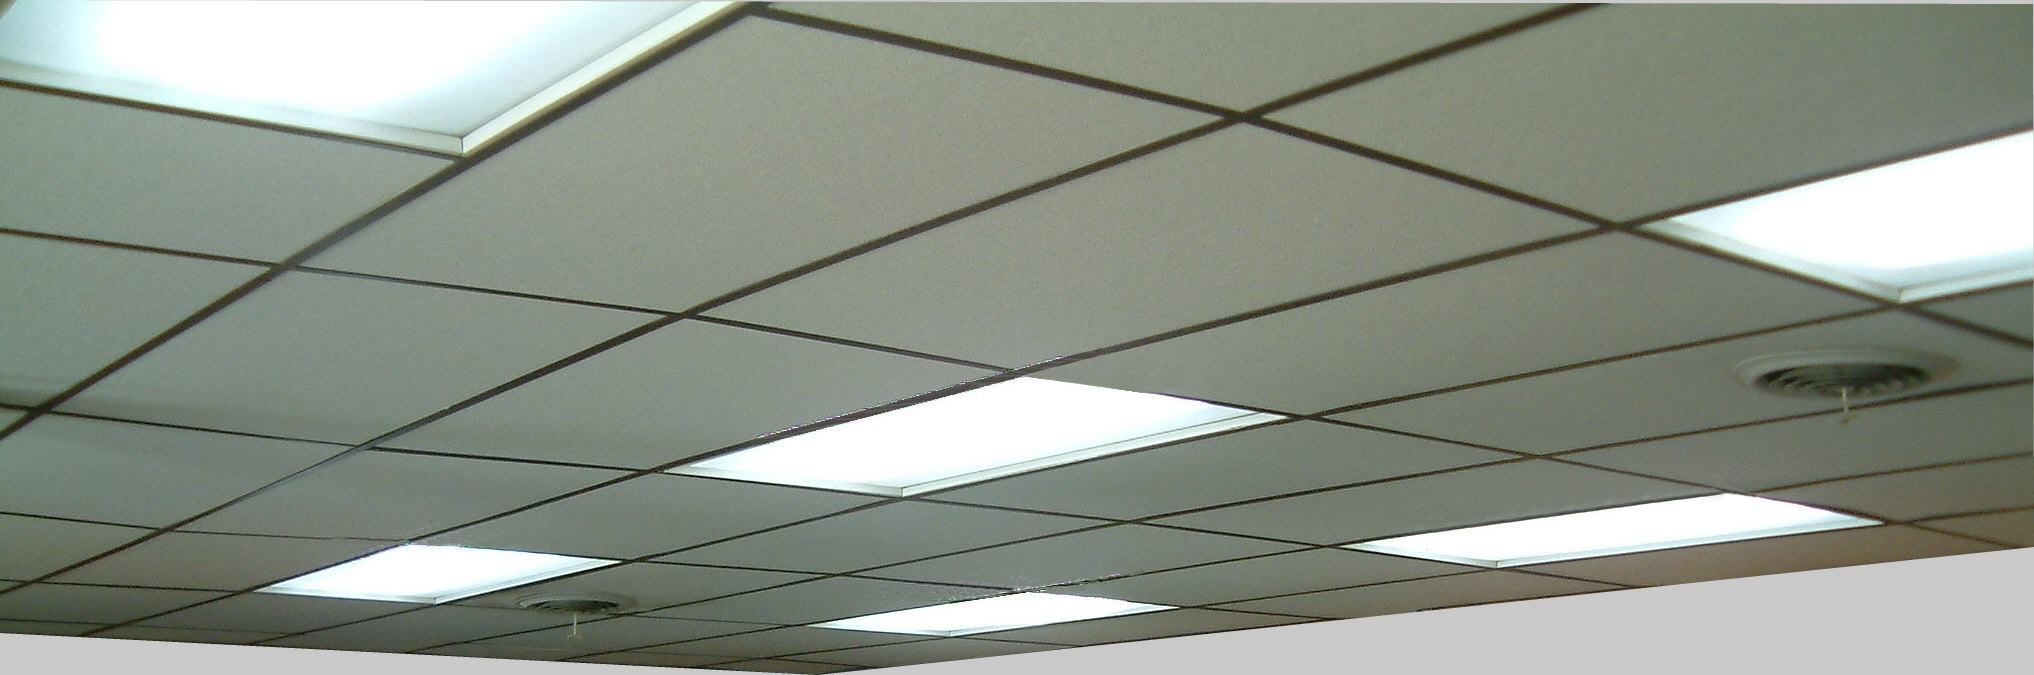 2×4 Drop Ceiling Light Covers